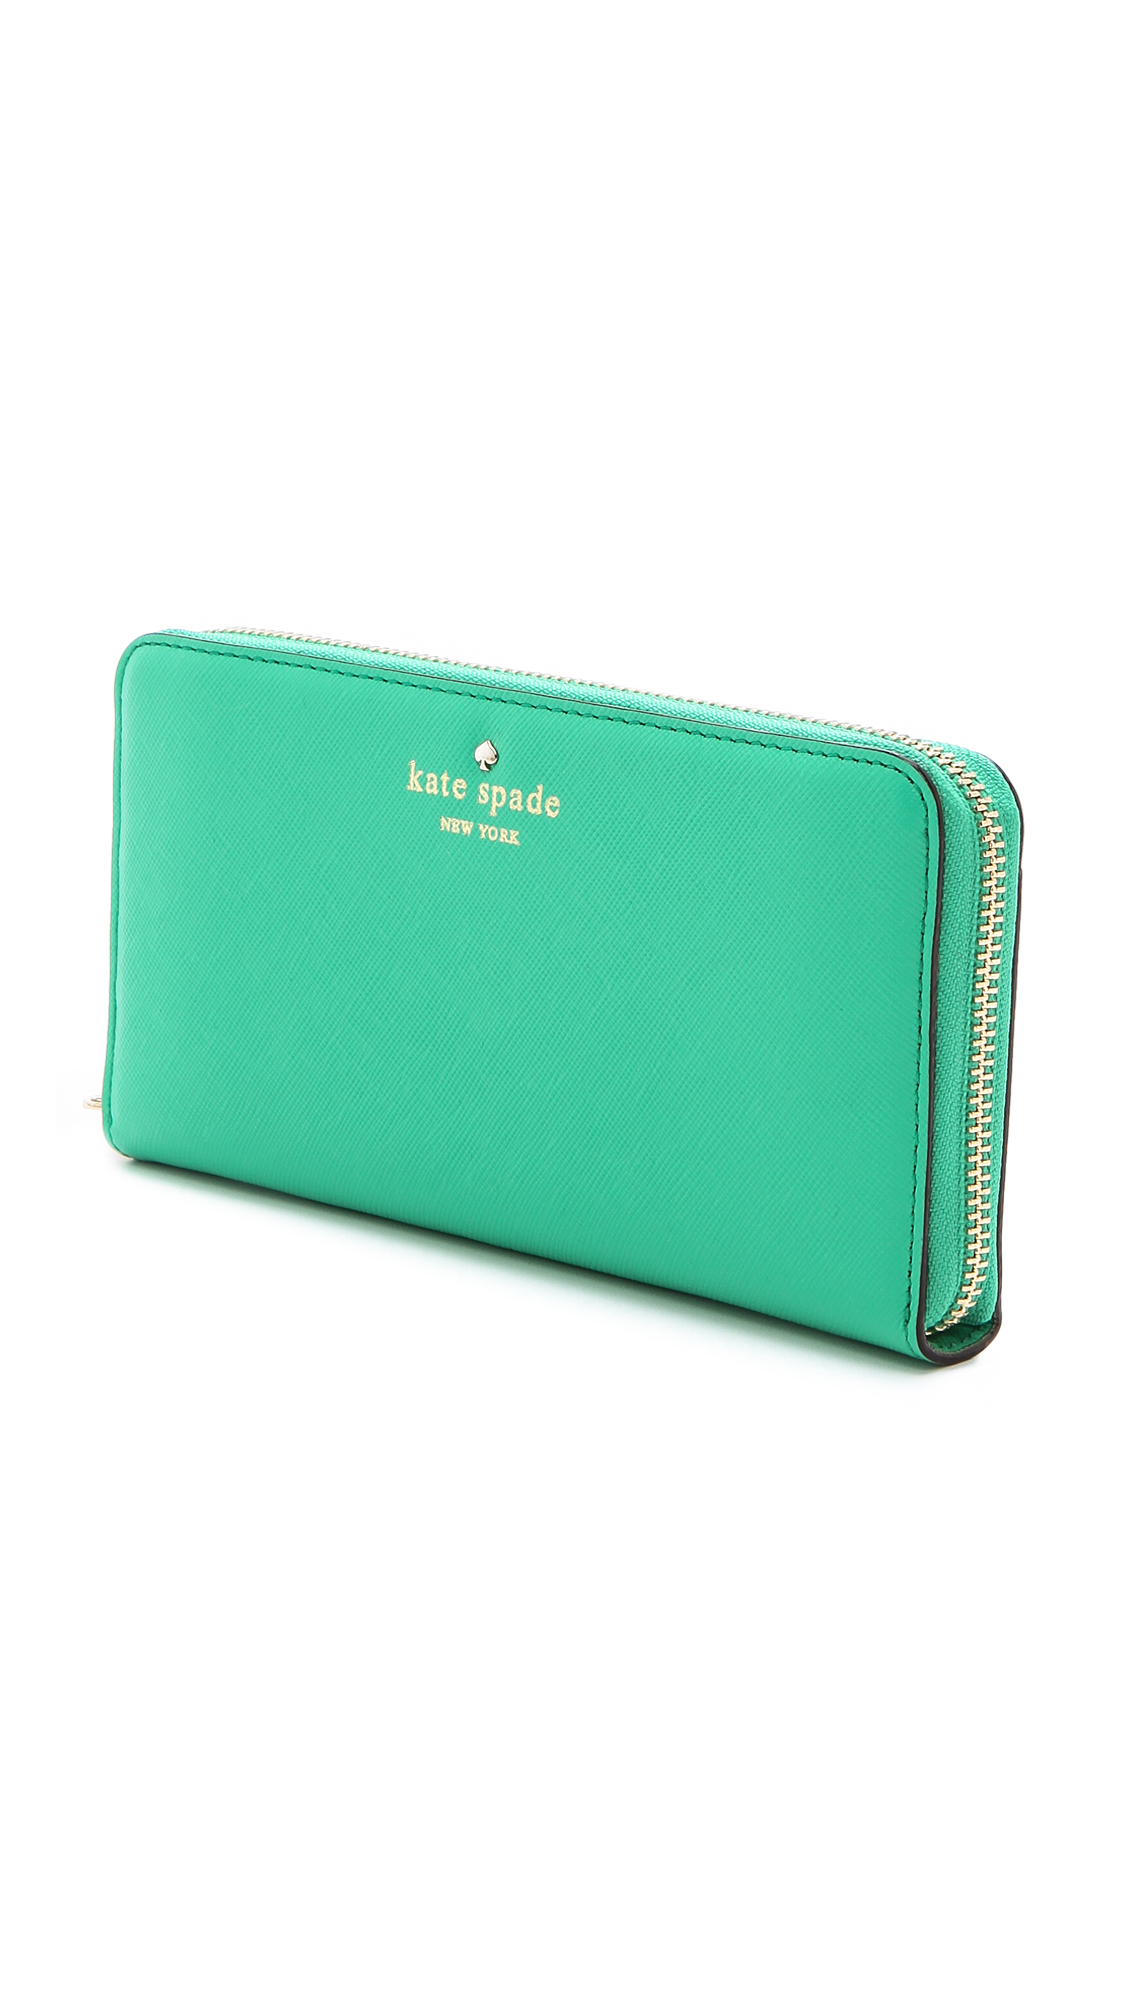 Lyst - Kate Spade New York Lacey Continental Wallet in Green